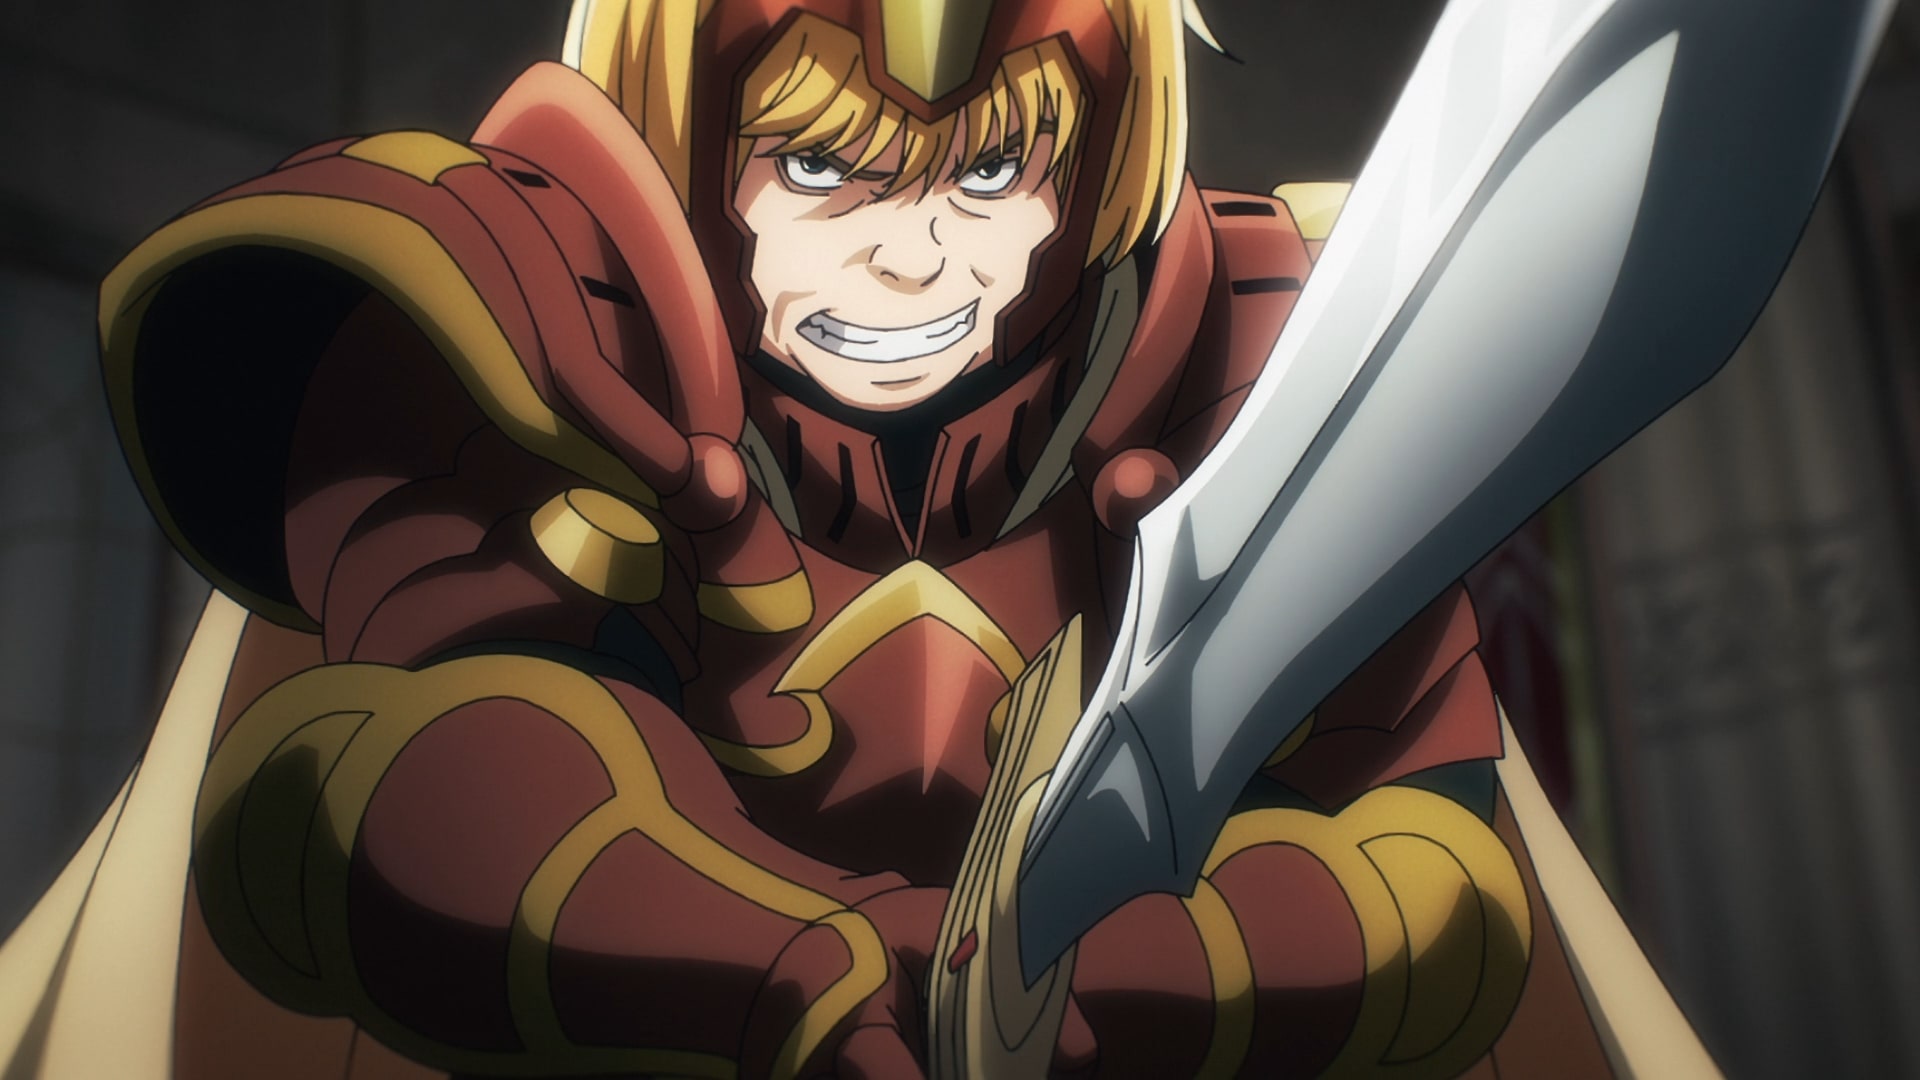 Overlord Season 4 Episode 11: Ains And His Wrath! Release Date & More!